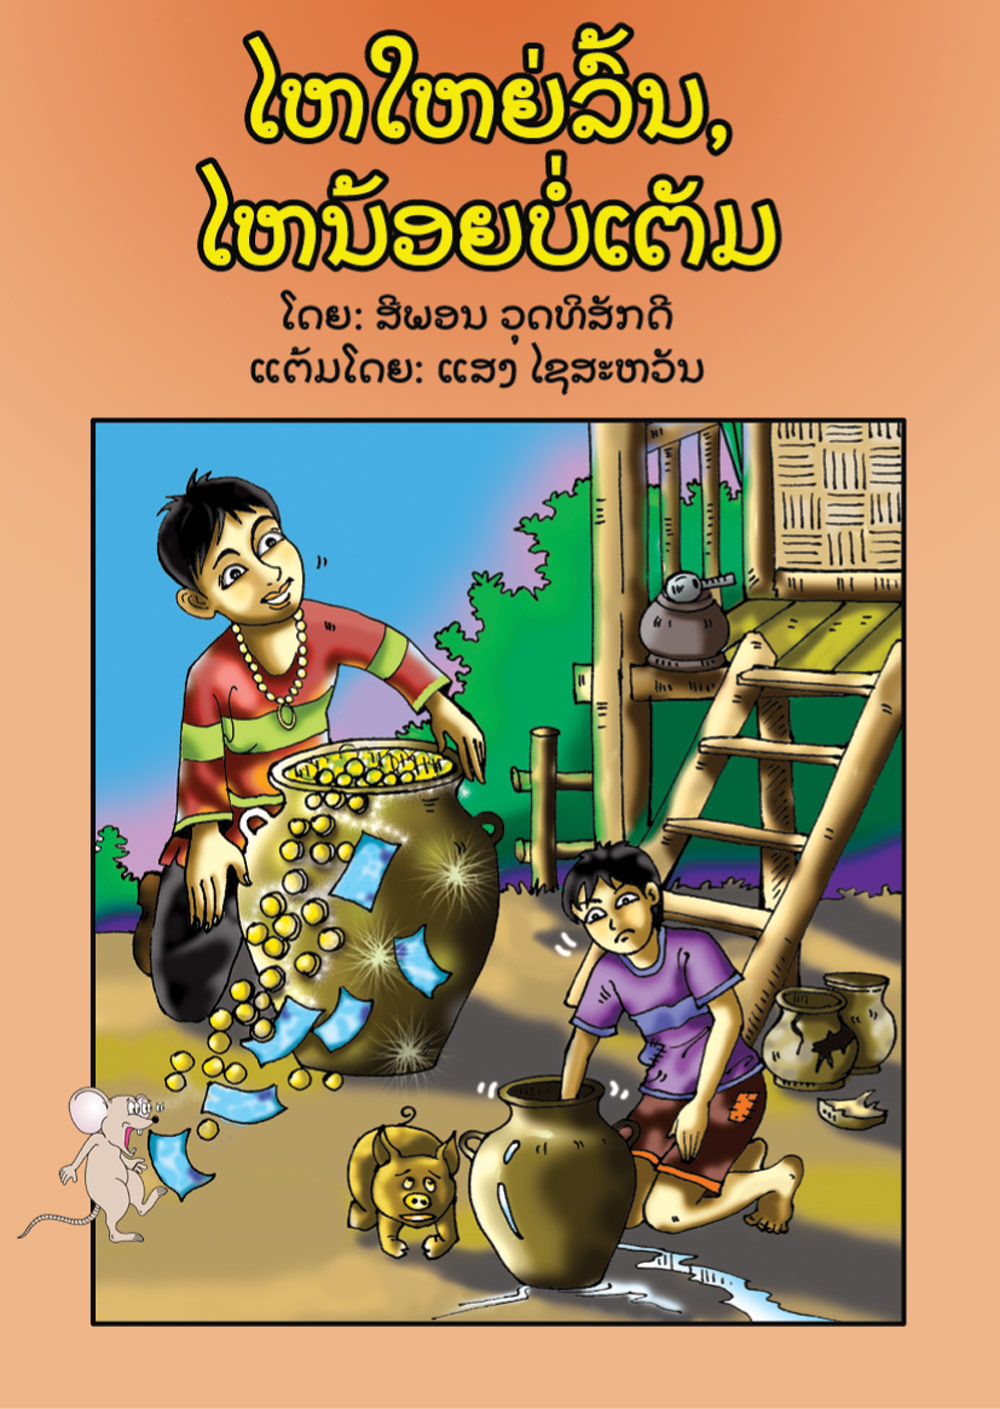 The Big Jar is Too Full, The Small Jar is Not Full large book cover, published in Lao language